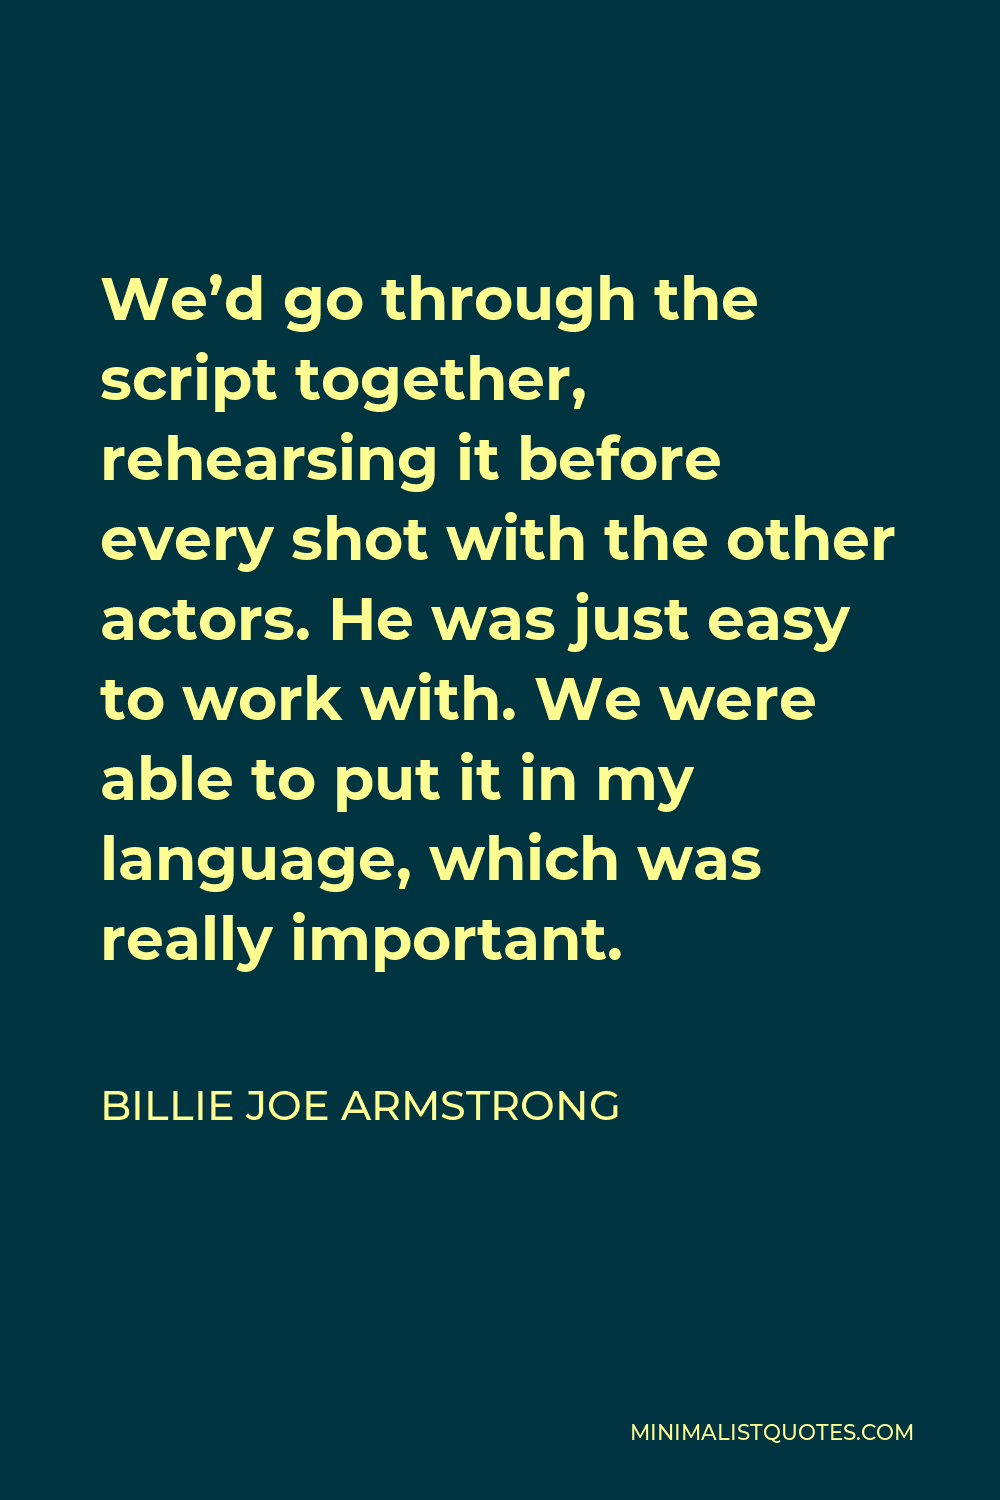 Billie Joe Armstrong Quote - We’d go through the script together, rehearsing it before every shot with the other actors. He was just easy to work with. We were able to put it in my language, which was really important.